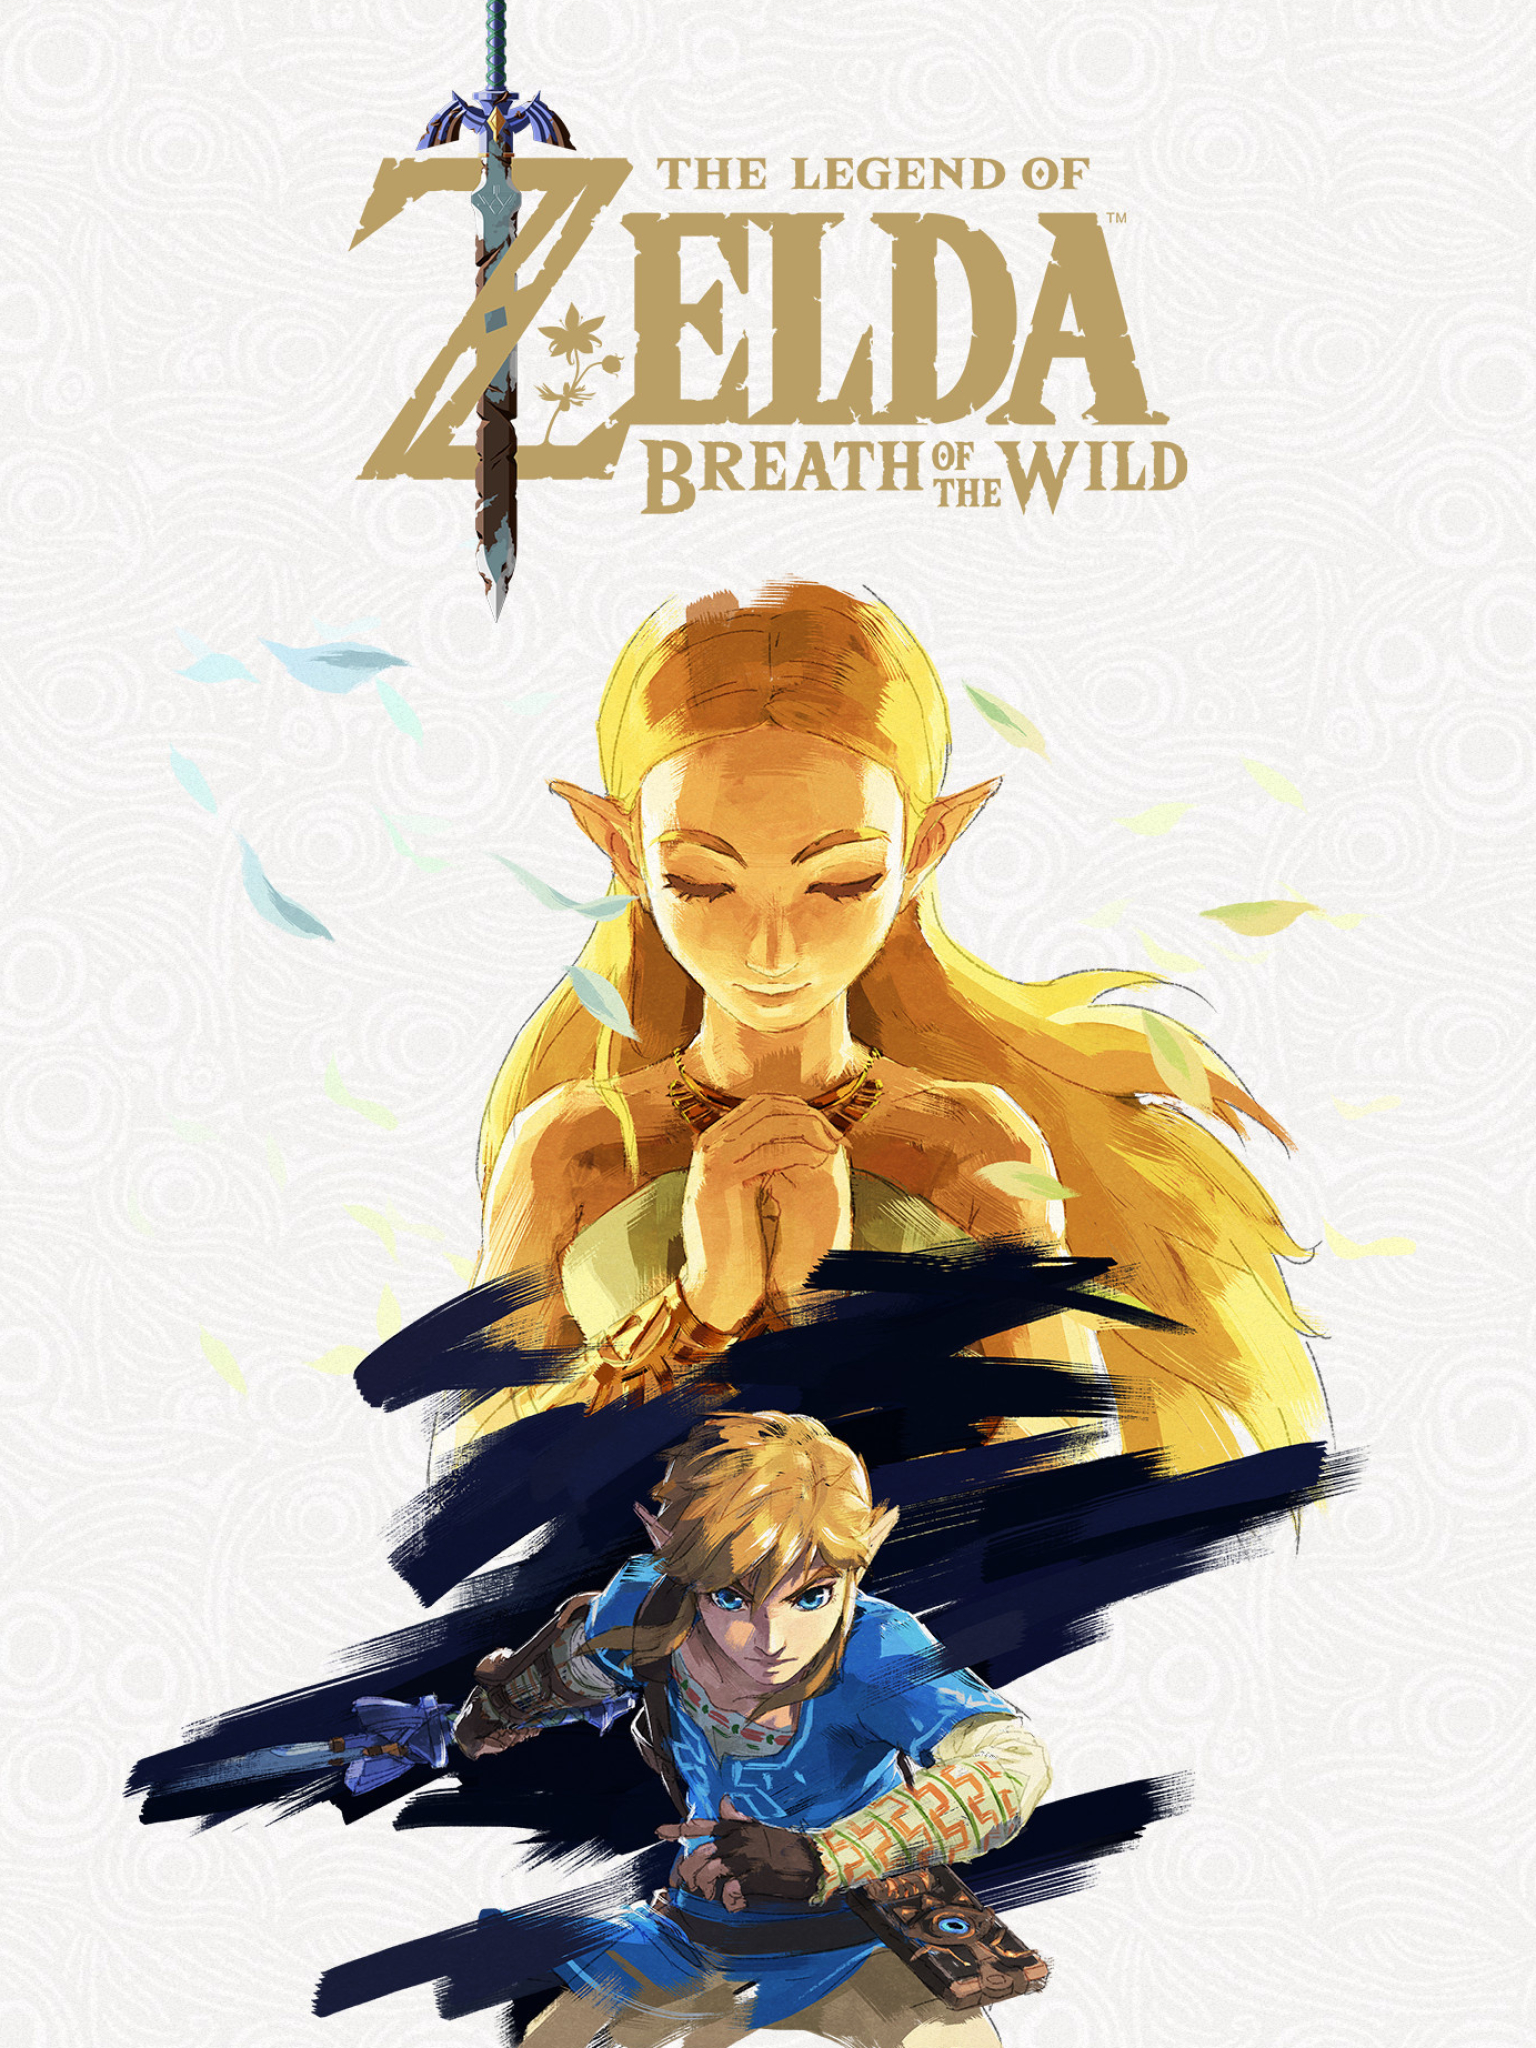 Breath of the Wild, Home gaming, Nintendo Wii U, Fresh quest, Hyrule revisited, 1540x2050 HD Handy